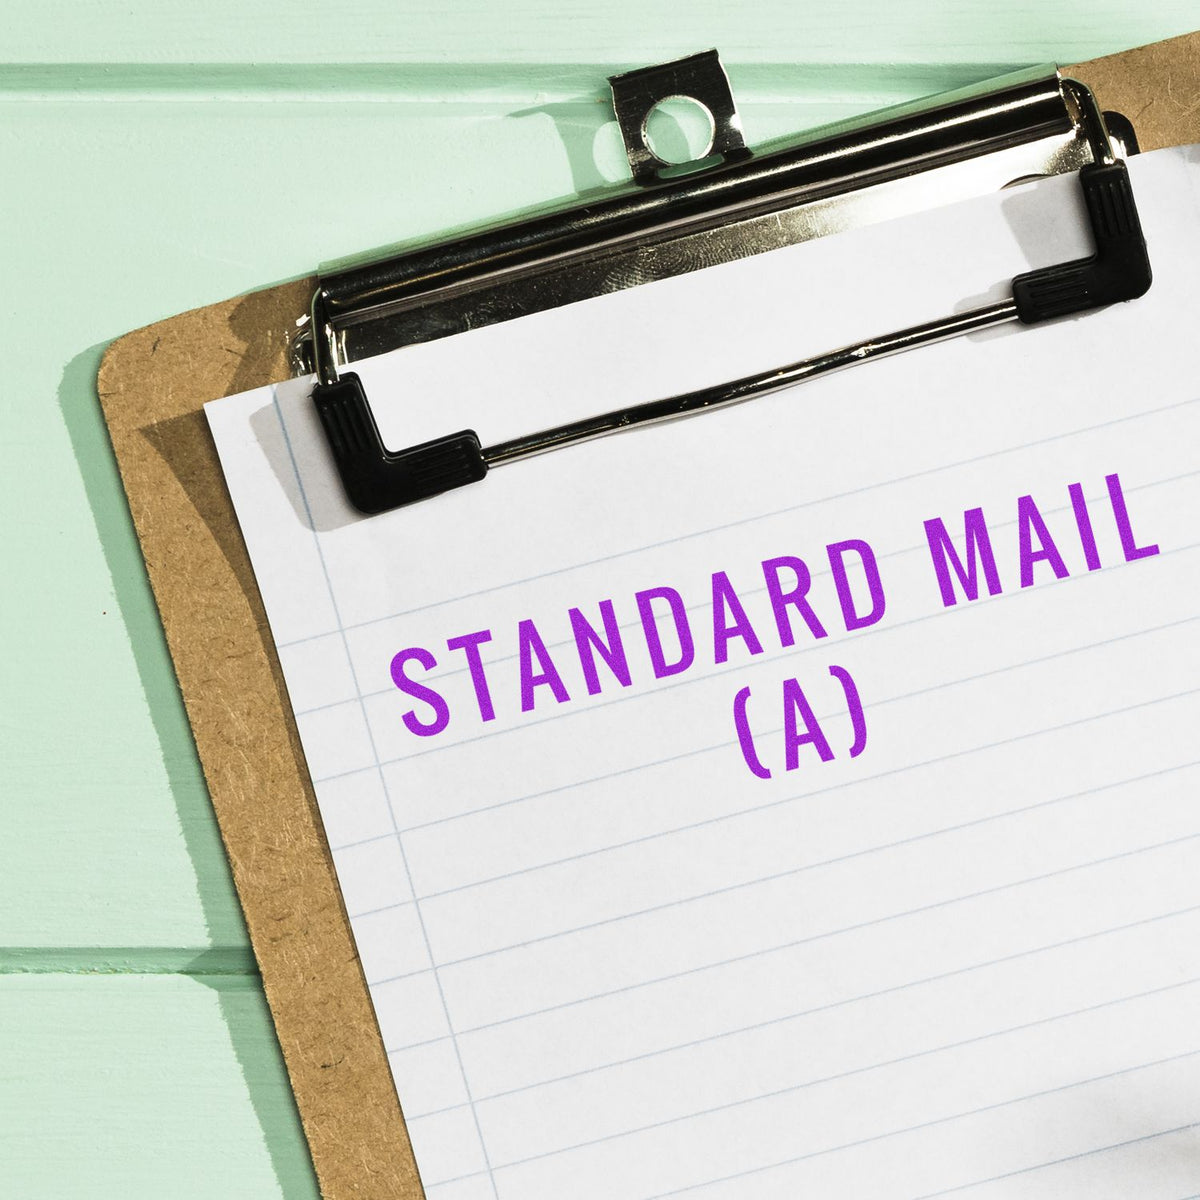 Slim Pre-Inked Standard Mail (A) Stamp In Use